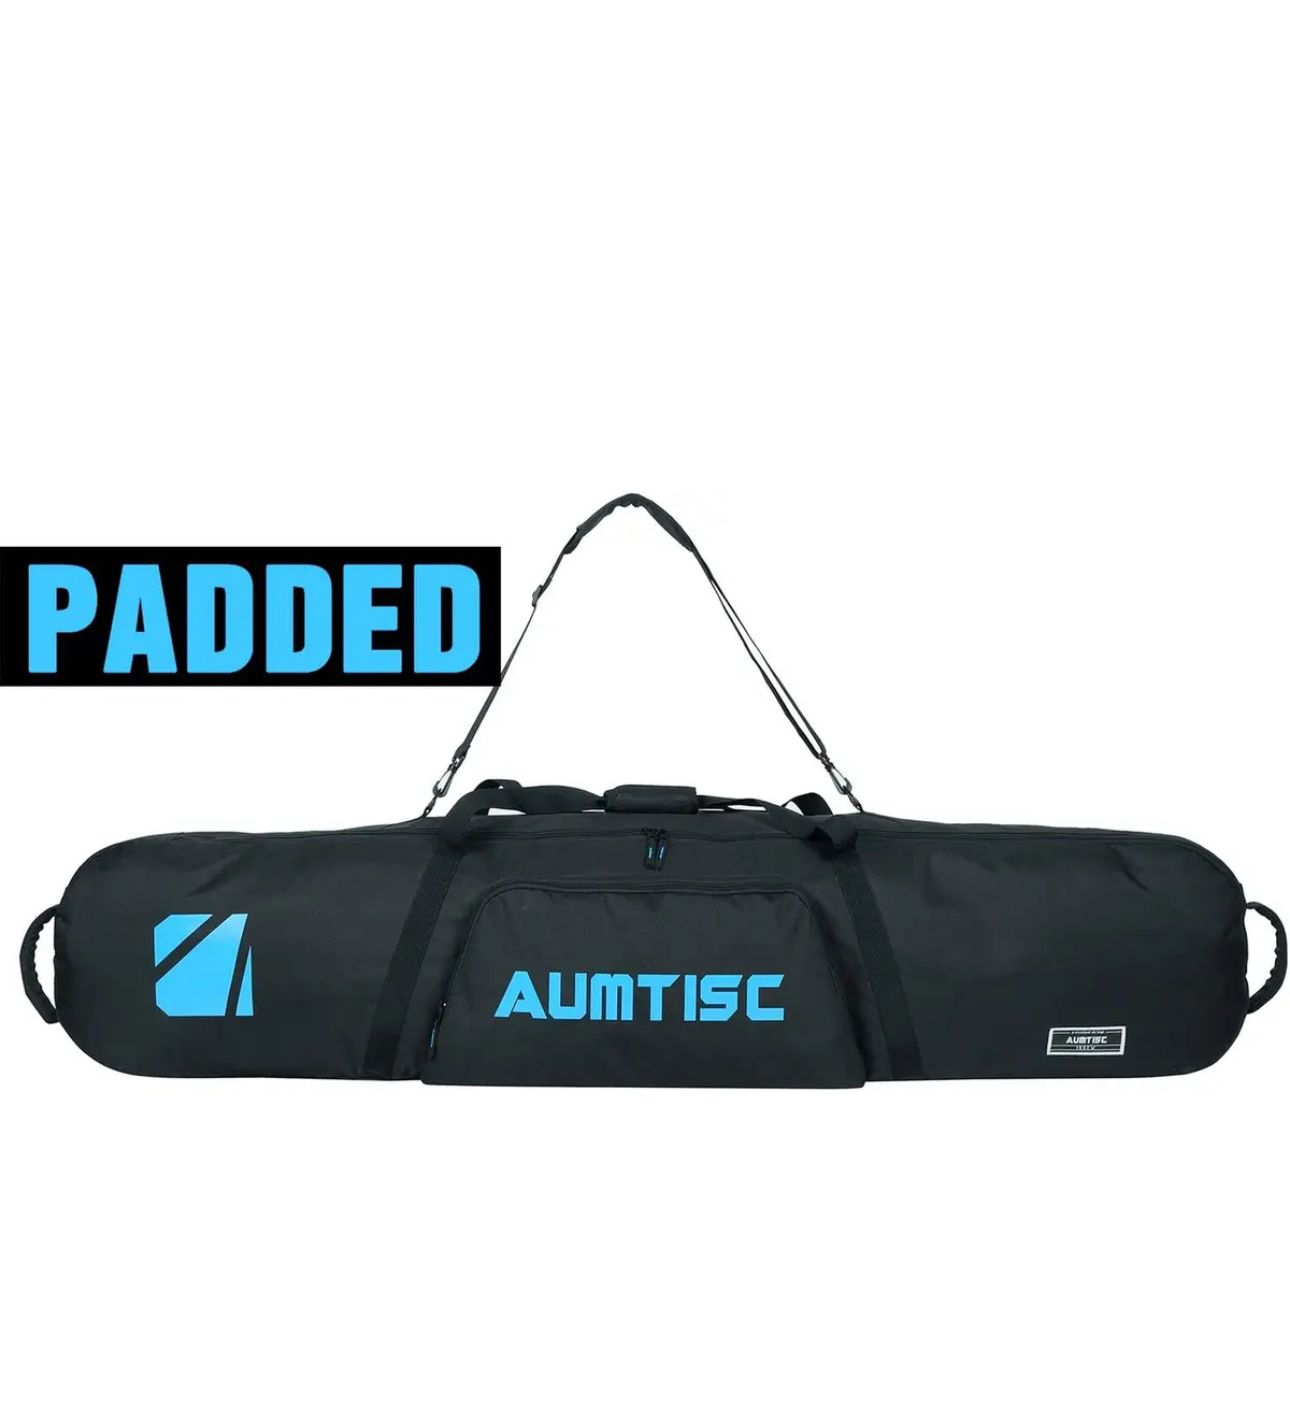 Snowboard Bag 155 Padded for Travel Bag with Storage Compartments